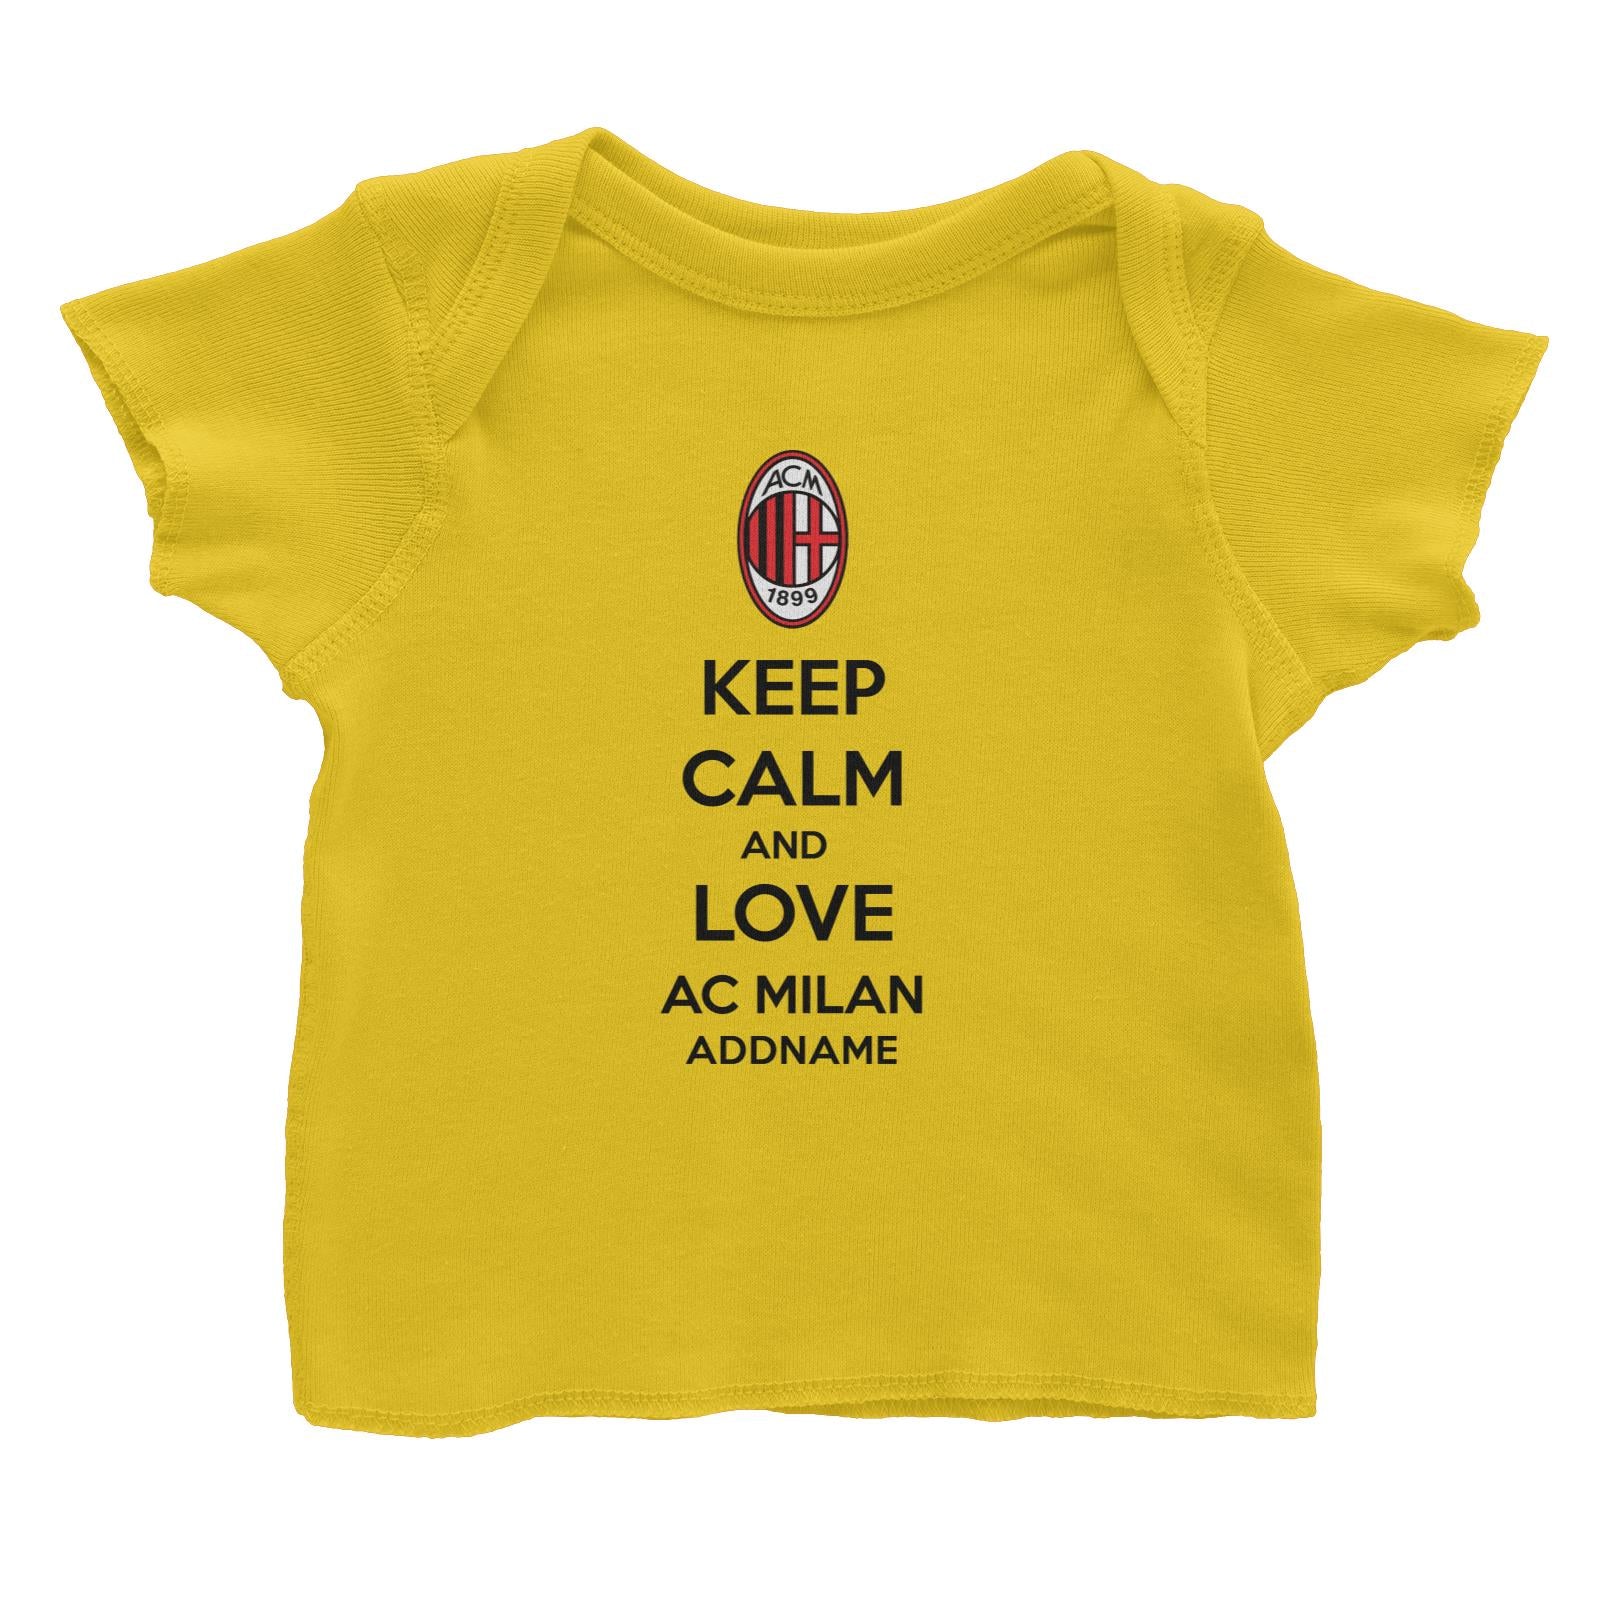 AC Milan Football Keep Calm And Love Serires Addname Baby T-Shirt